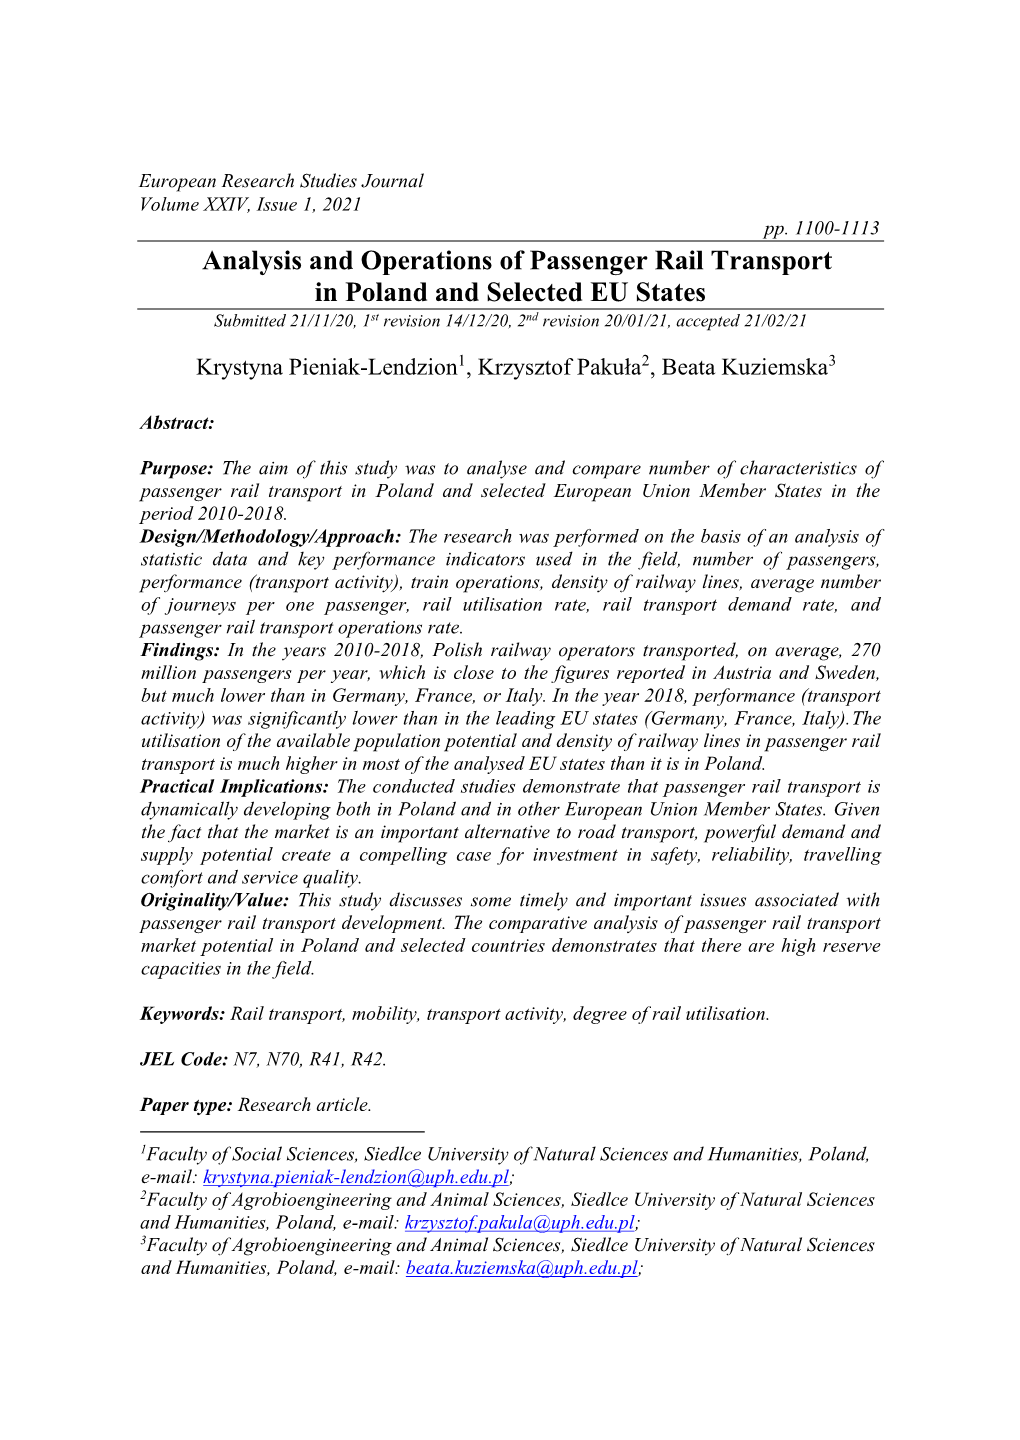 Analysis and Operations of Passenger Rail Transport in Poland And